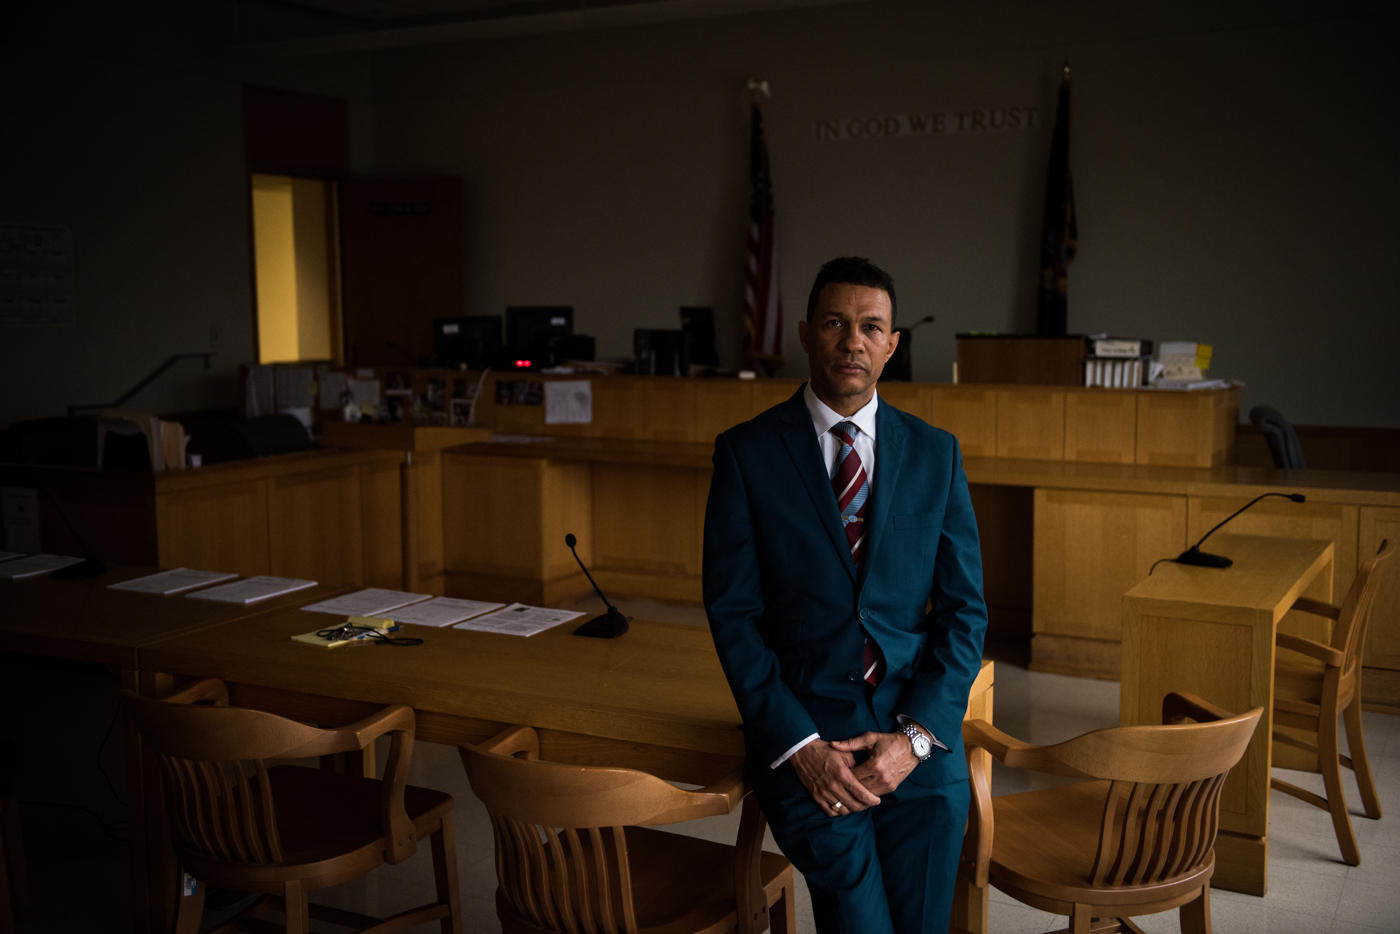  Hermes Mena, Principal Court Interpreter for Queens County Family Court, 2017 for The Wall Street Journal 